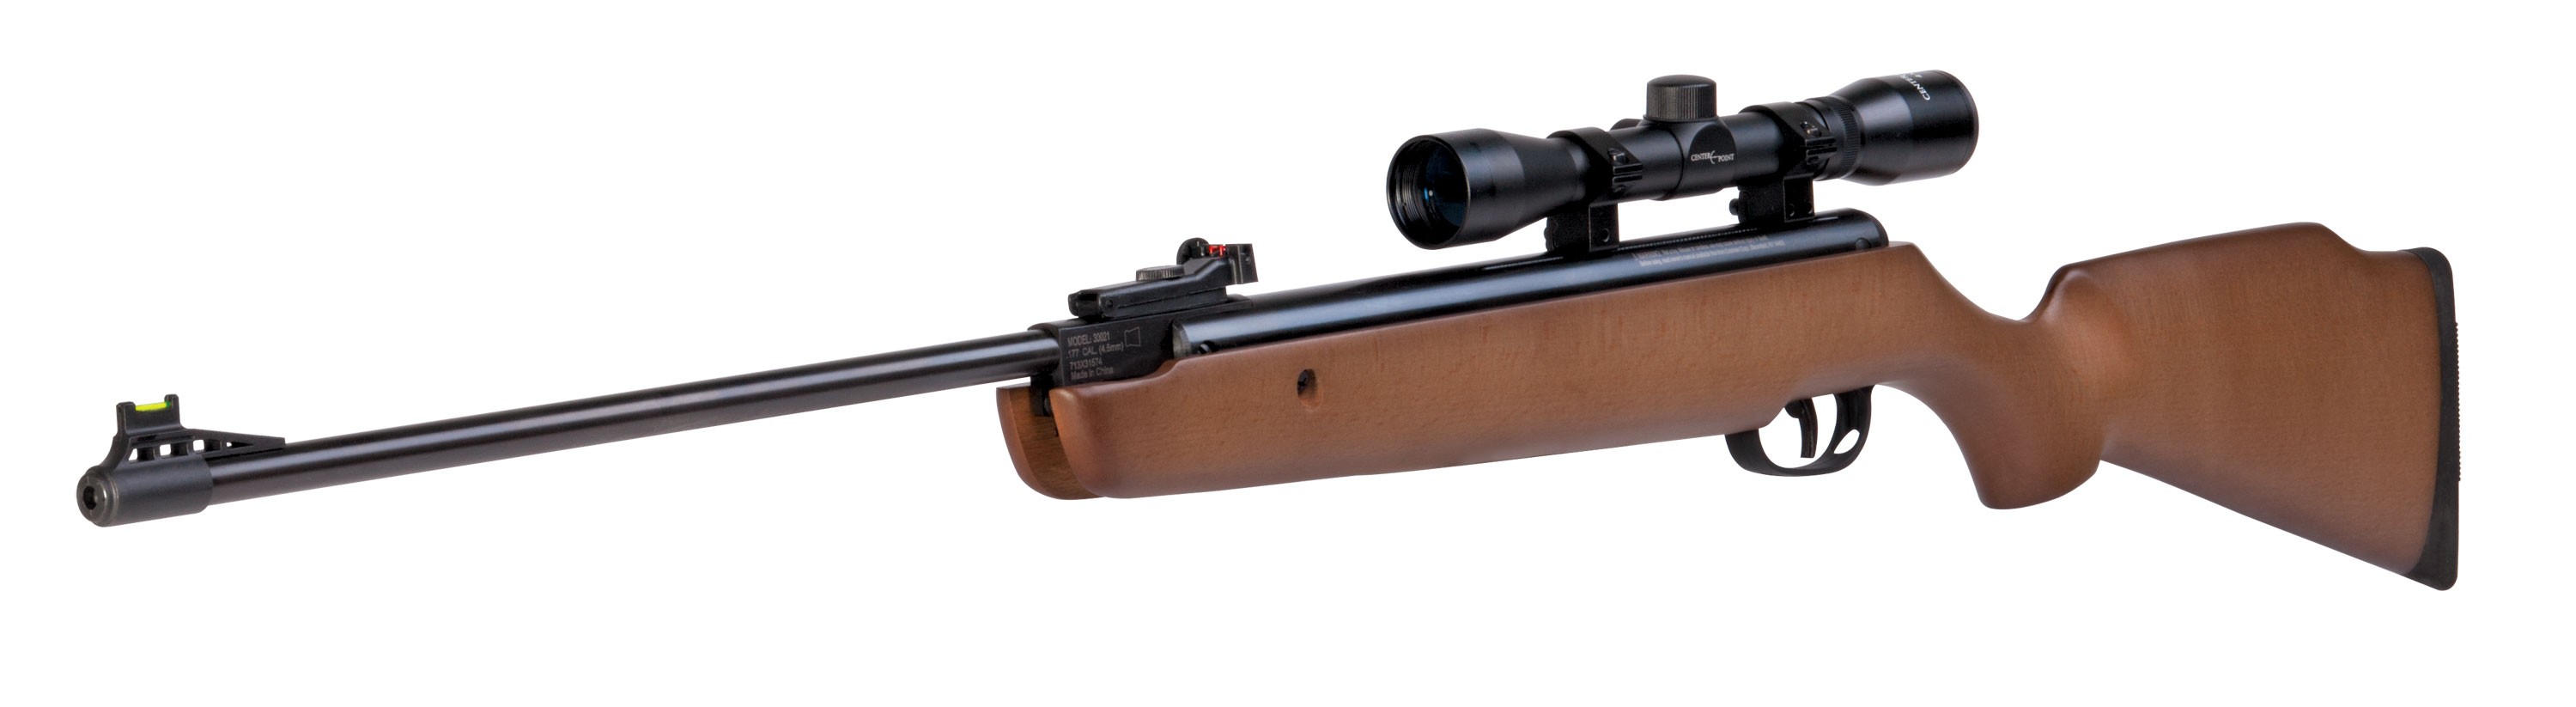 van1 Best Air Rifles for Beginners - Top 5 cheap guns in 2022 (Reviews and Buying Guide)